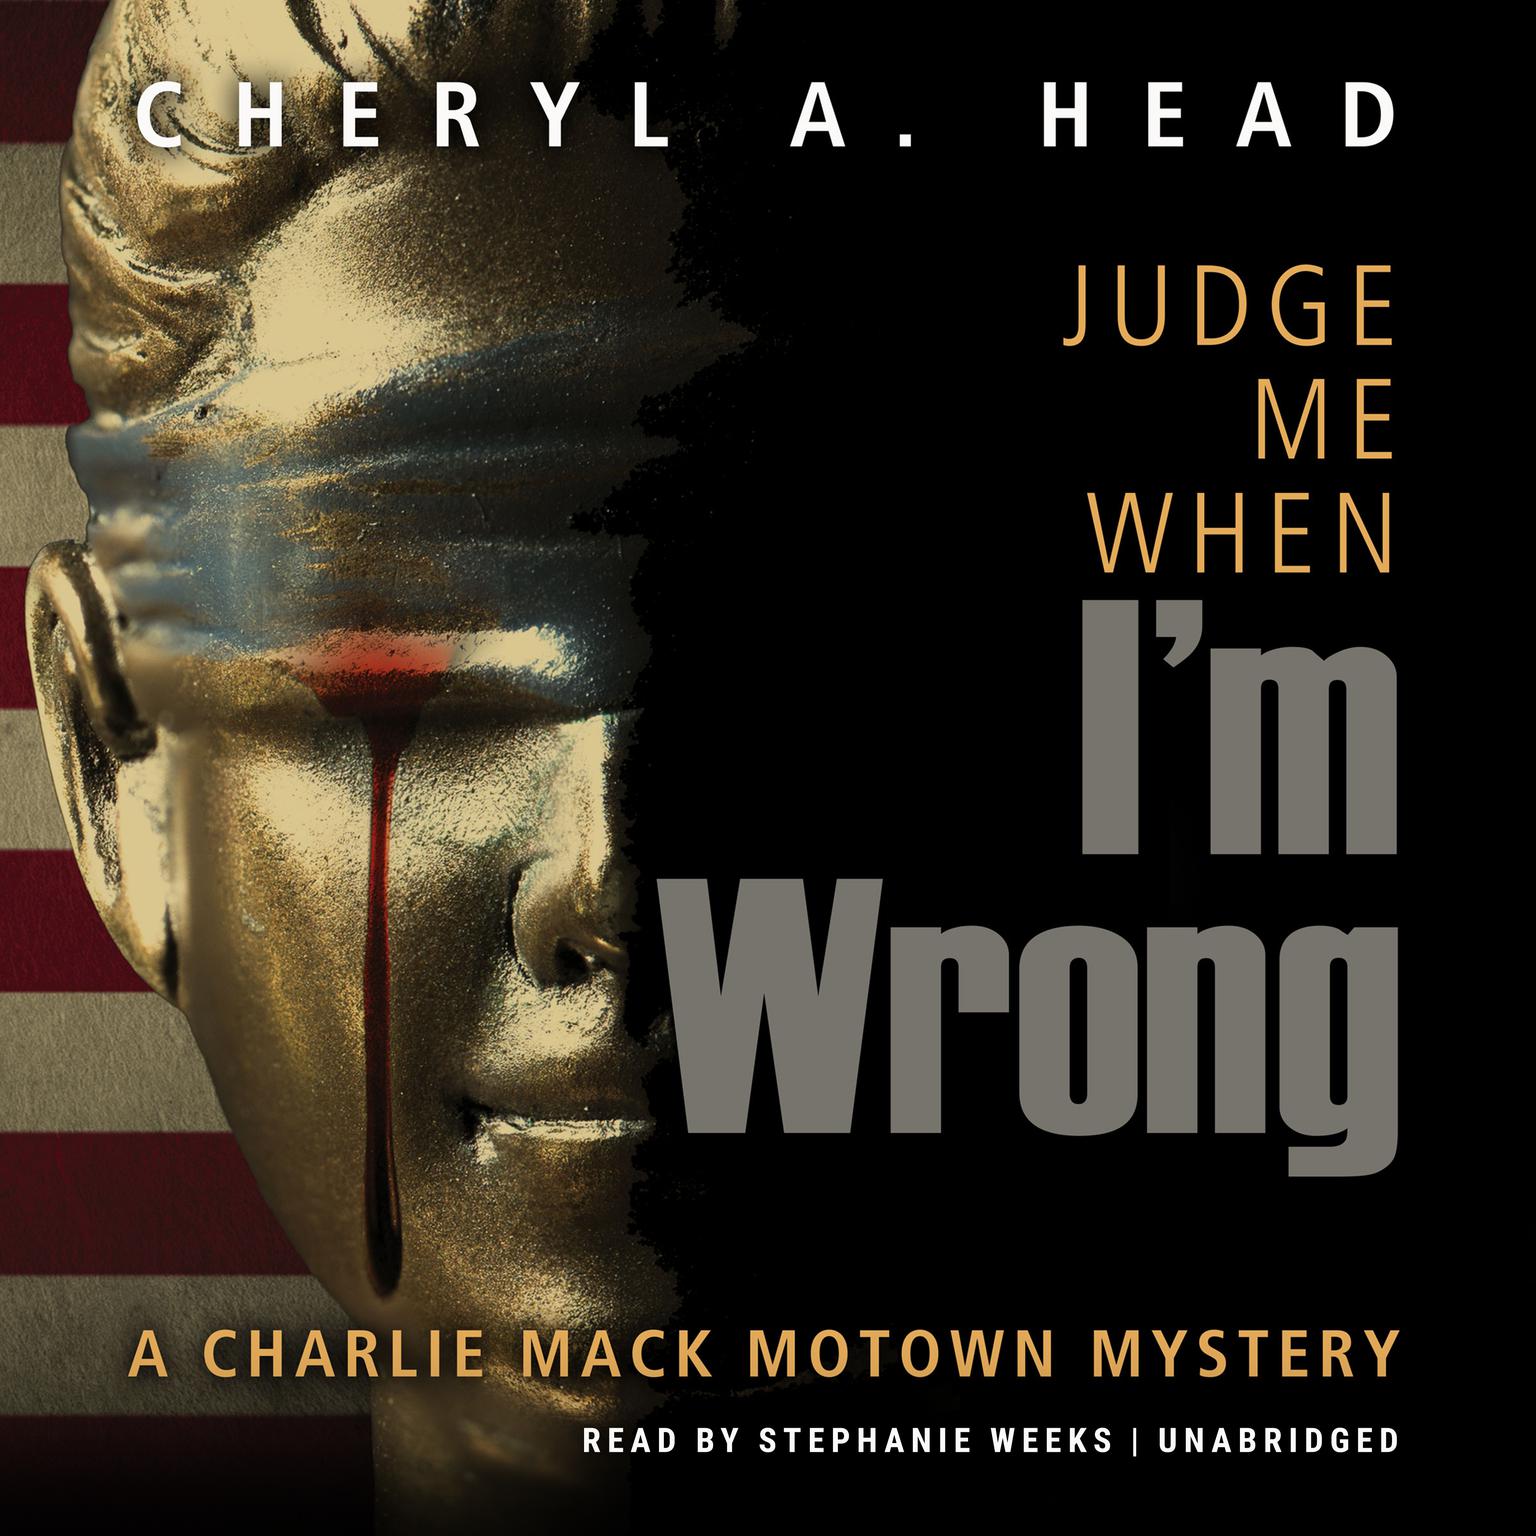 Judge Me When Im Wrong Audiobook, by Cheryl A. Head